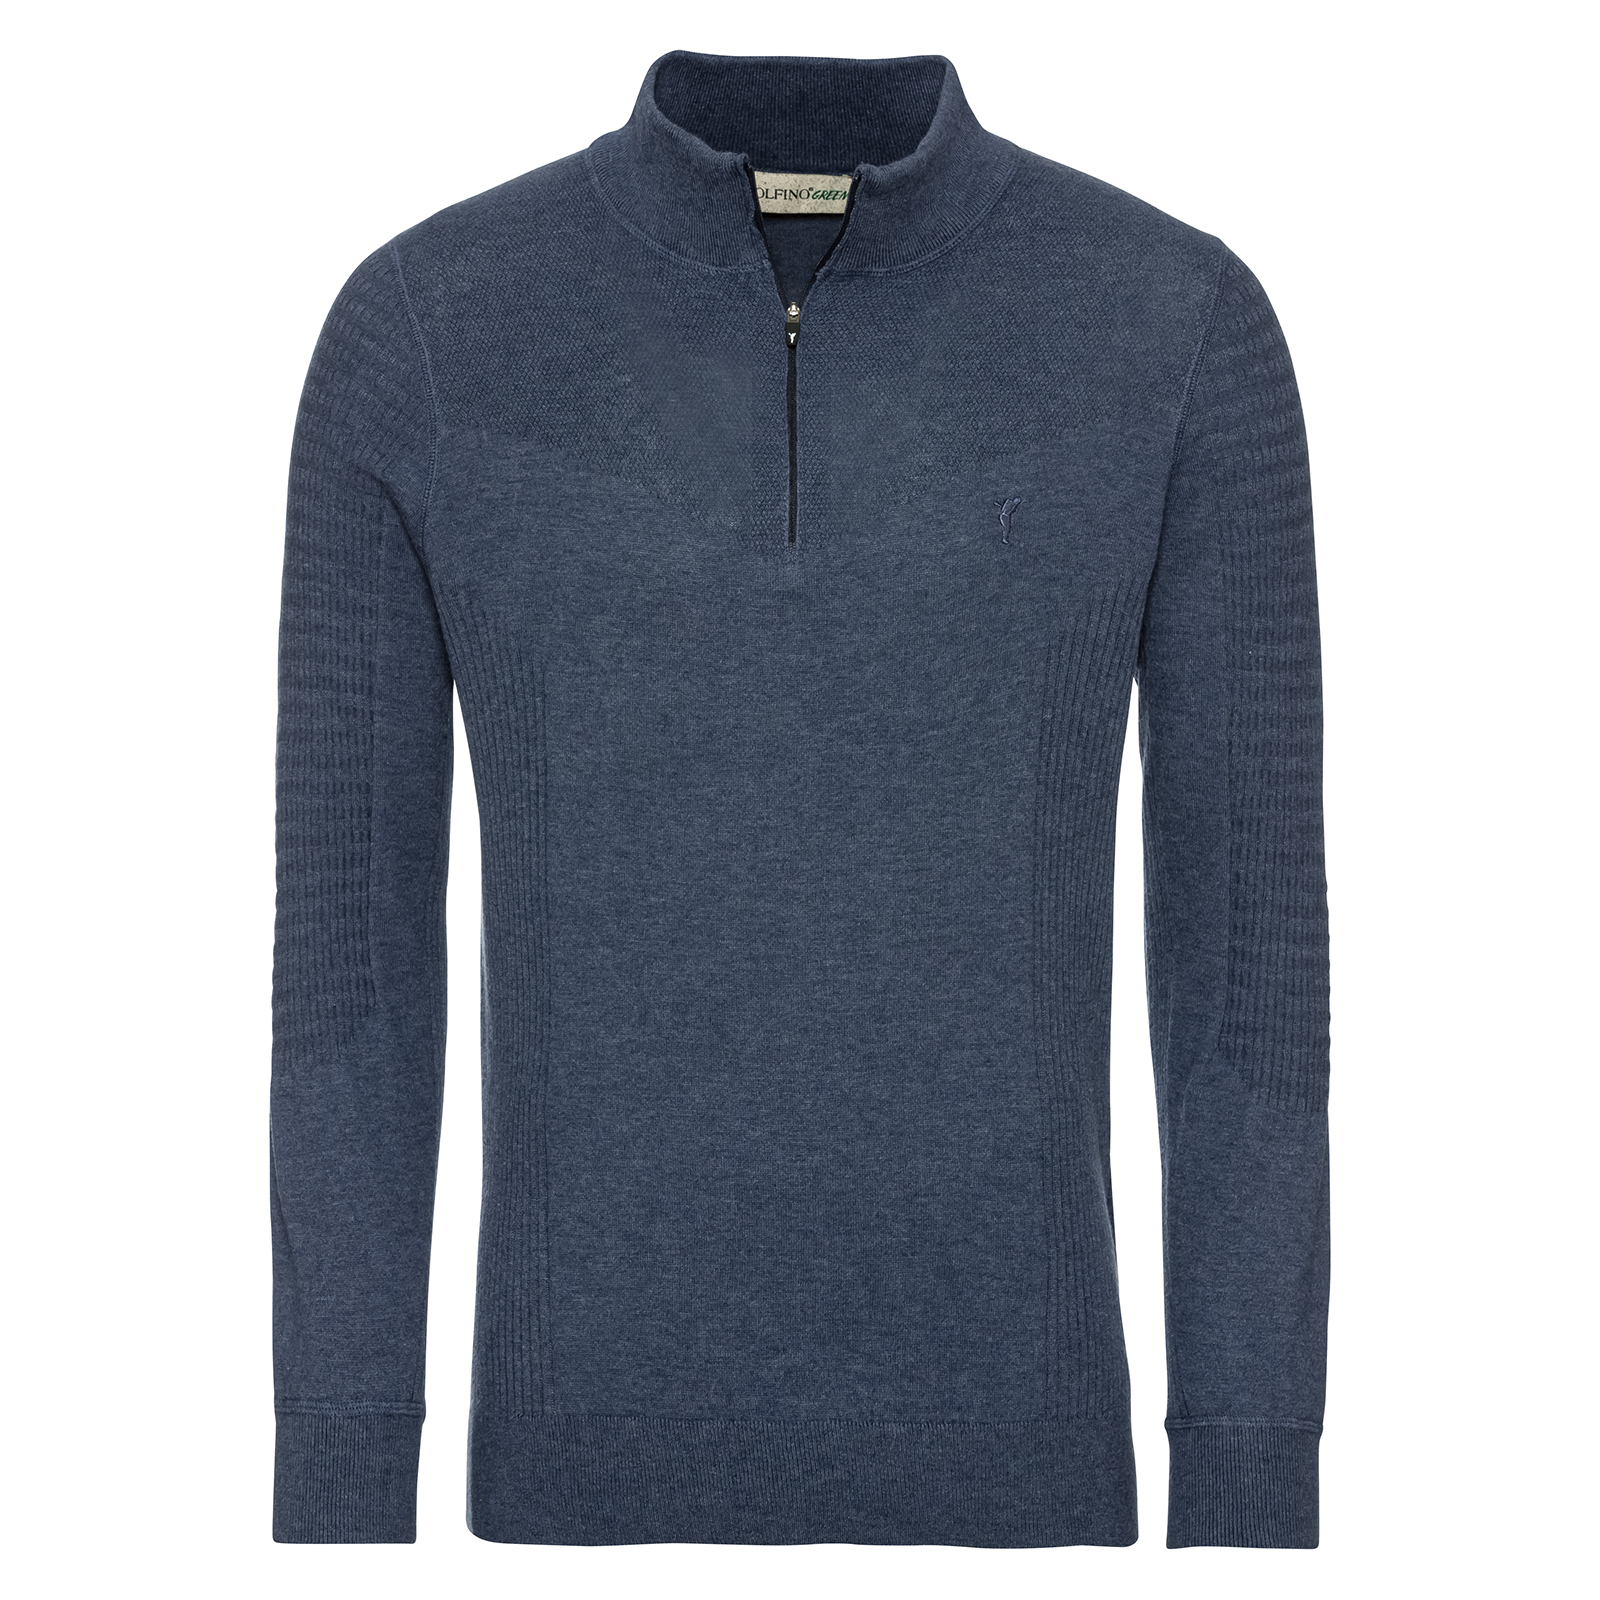 Men's knitted half-zip golf sweater with temperature-regulating Coolmax® technology 